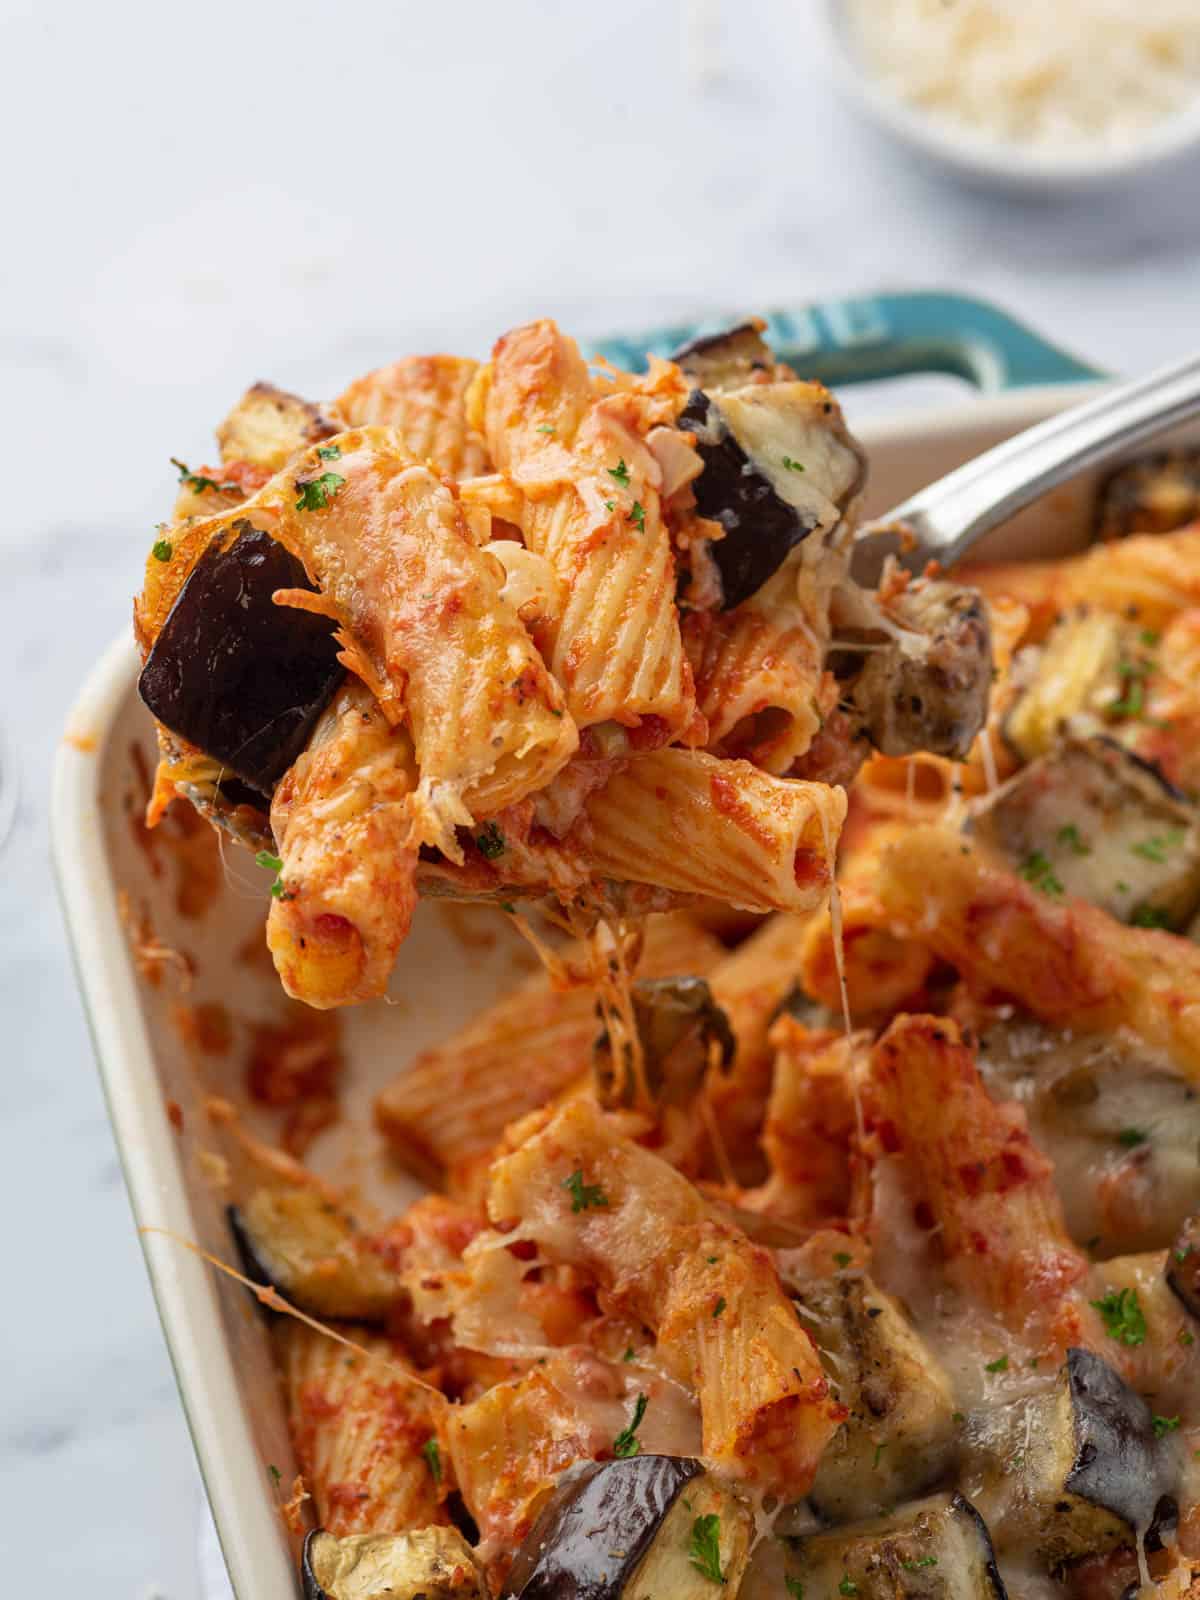 A scoop of baked eggplant pasta with the casserole dish in the background.